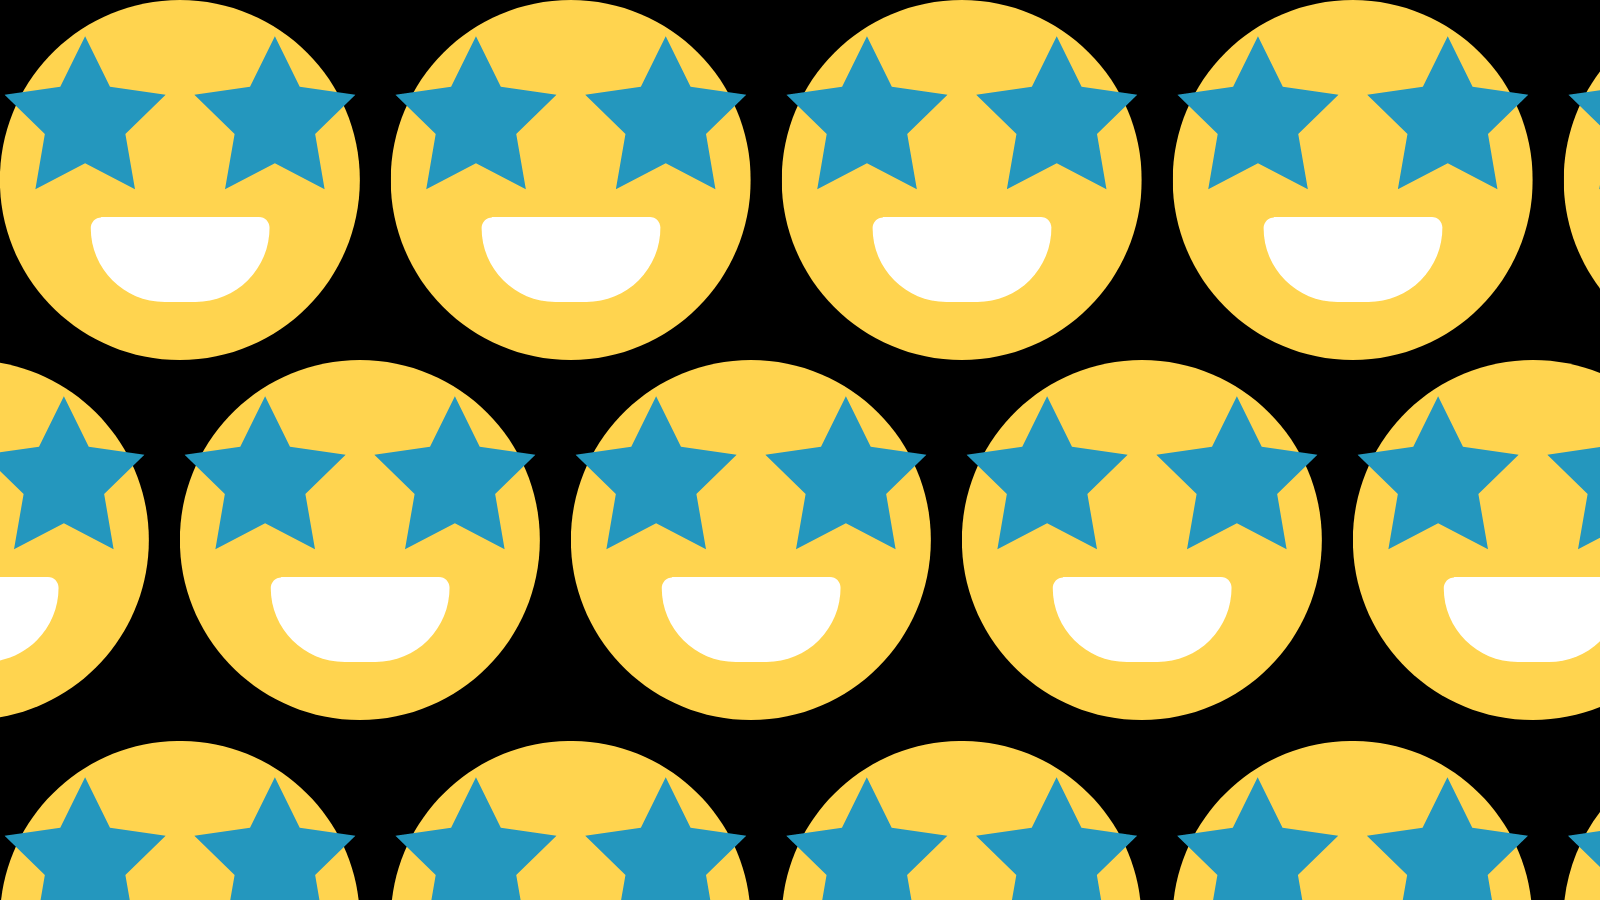 A repeating pattern of starry-eyed emojis